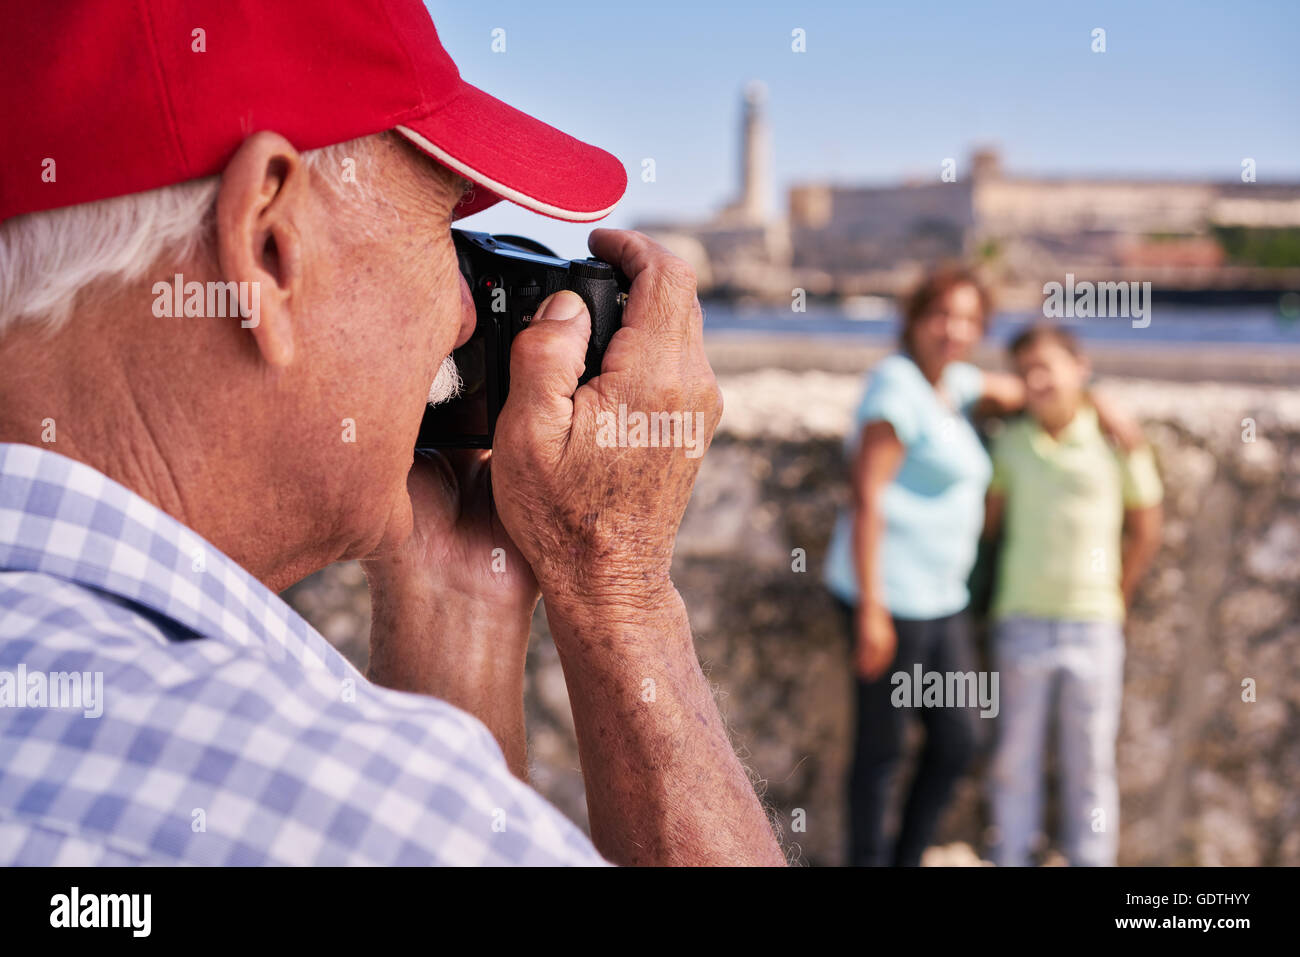 Happy tourists on holidays. Hispanic people traveling in Havana, Cuba. Grandfather, grandmother and grandchild during travel Stock Photo